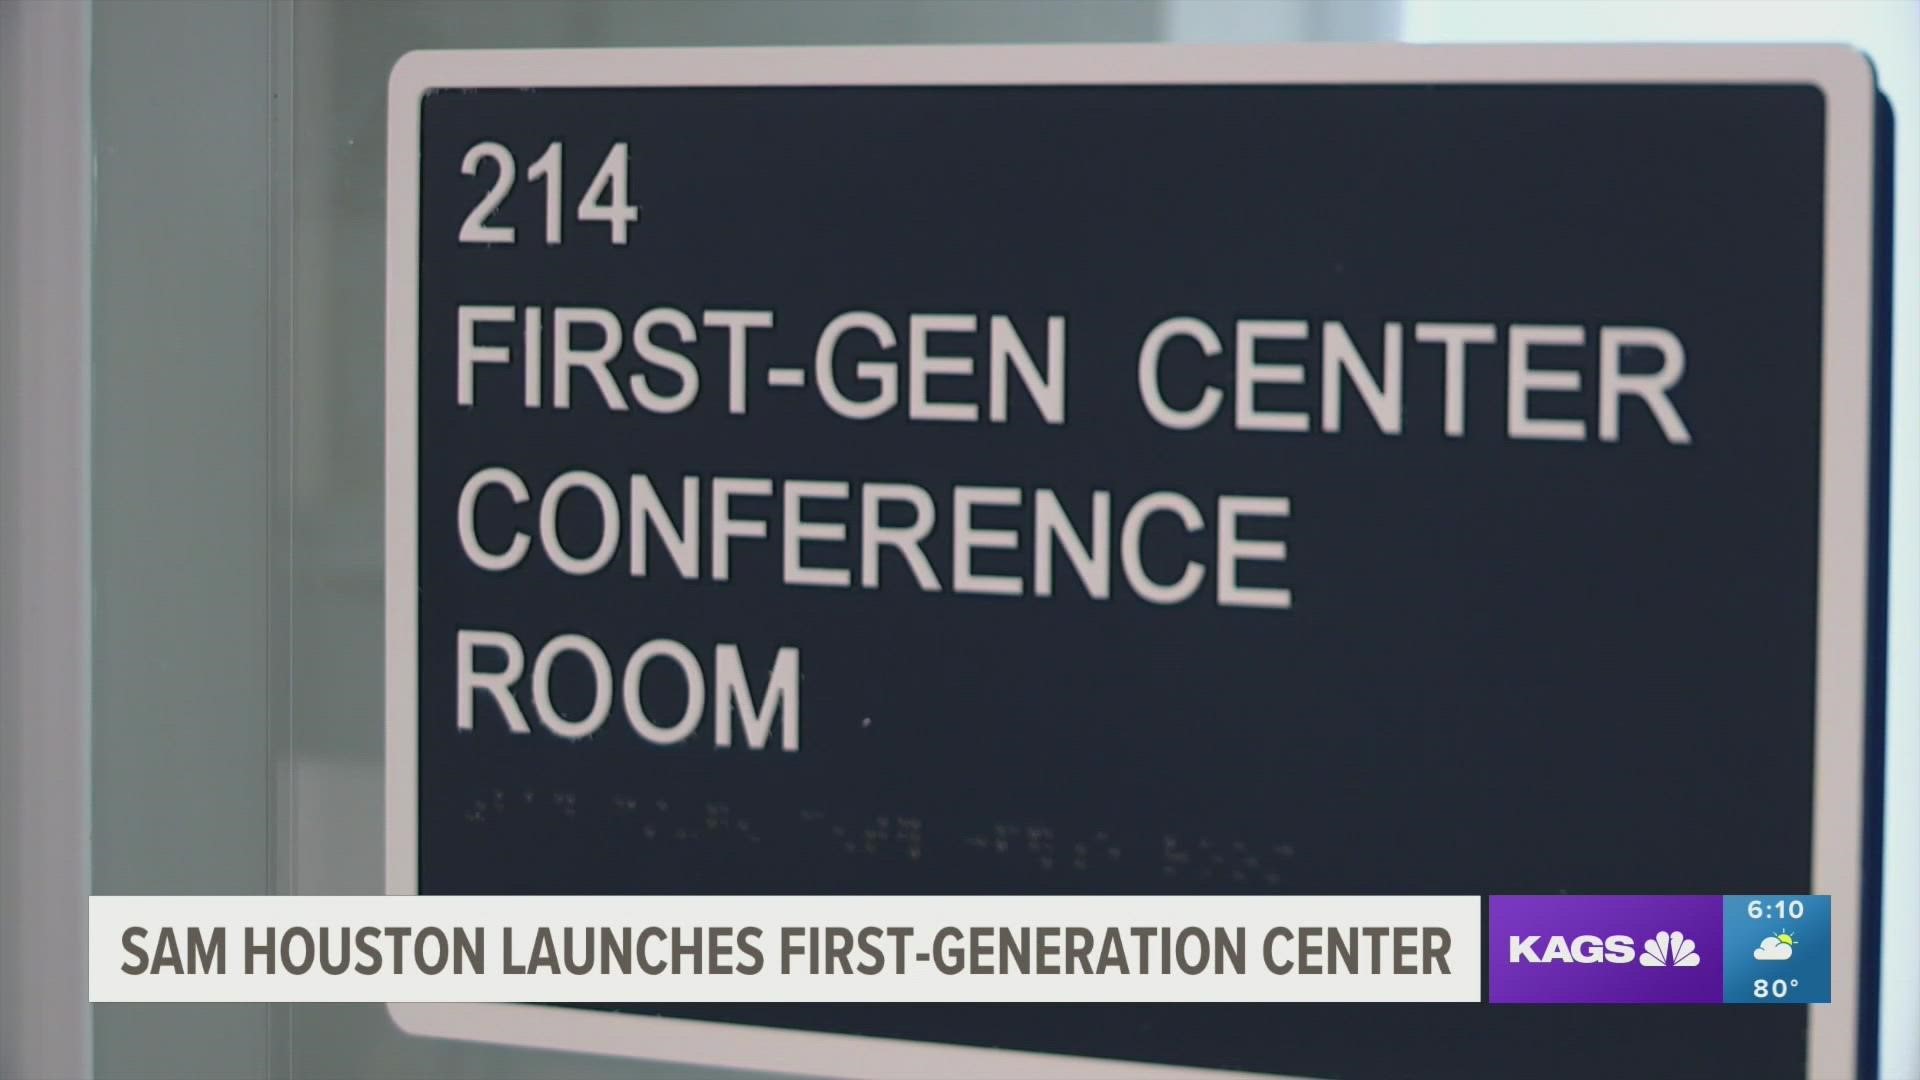 The new first-generation center for students was created to assist the roughly 50% of the student body that is the first in their family to attend the institution